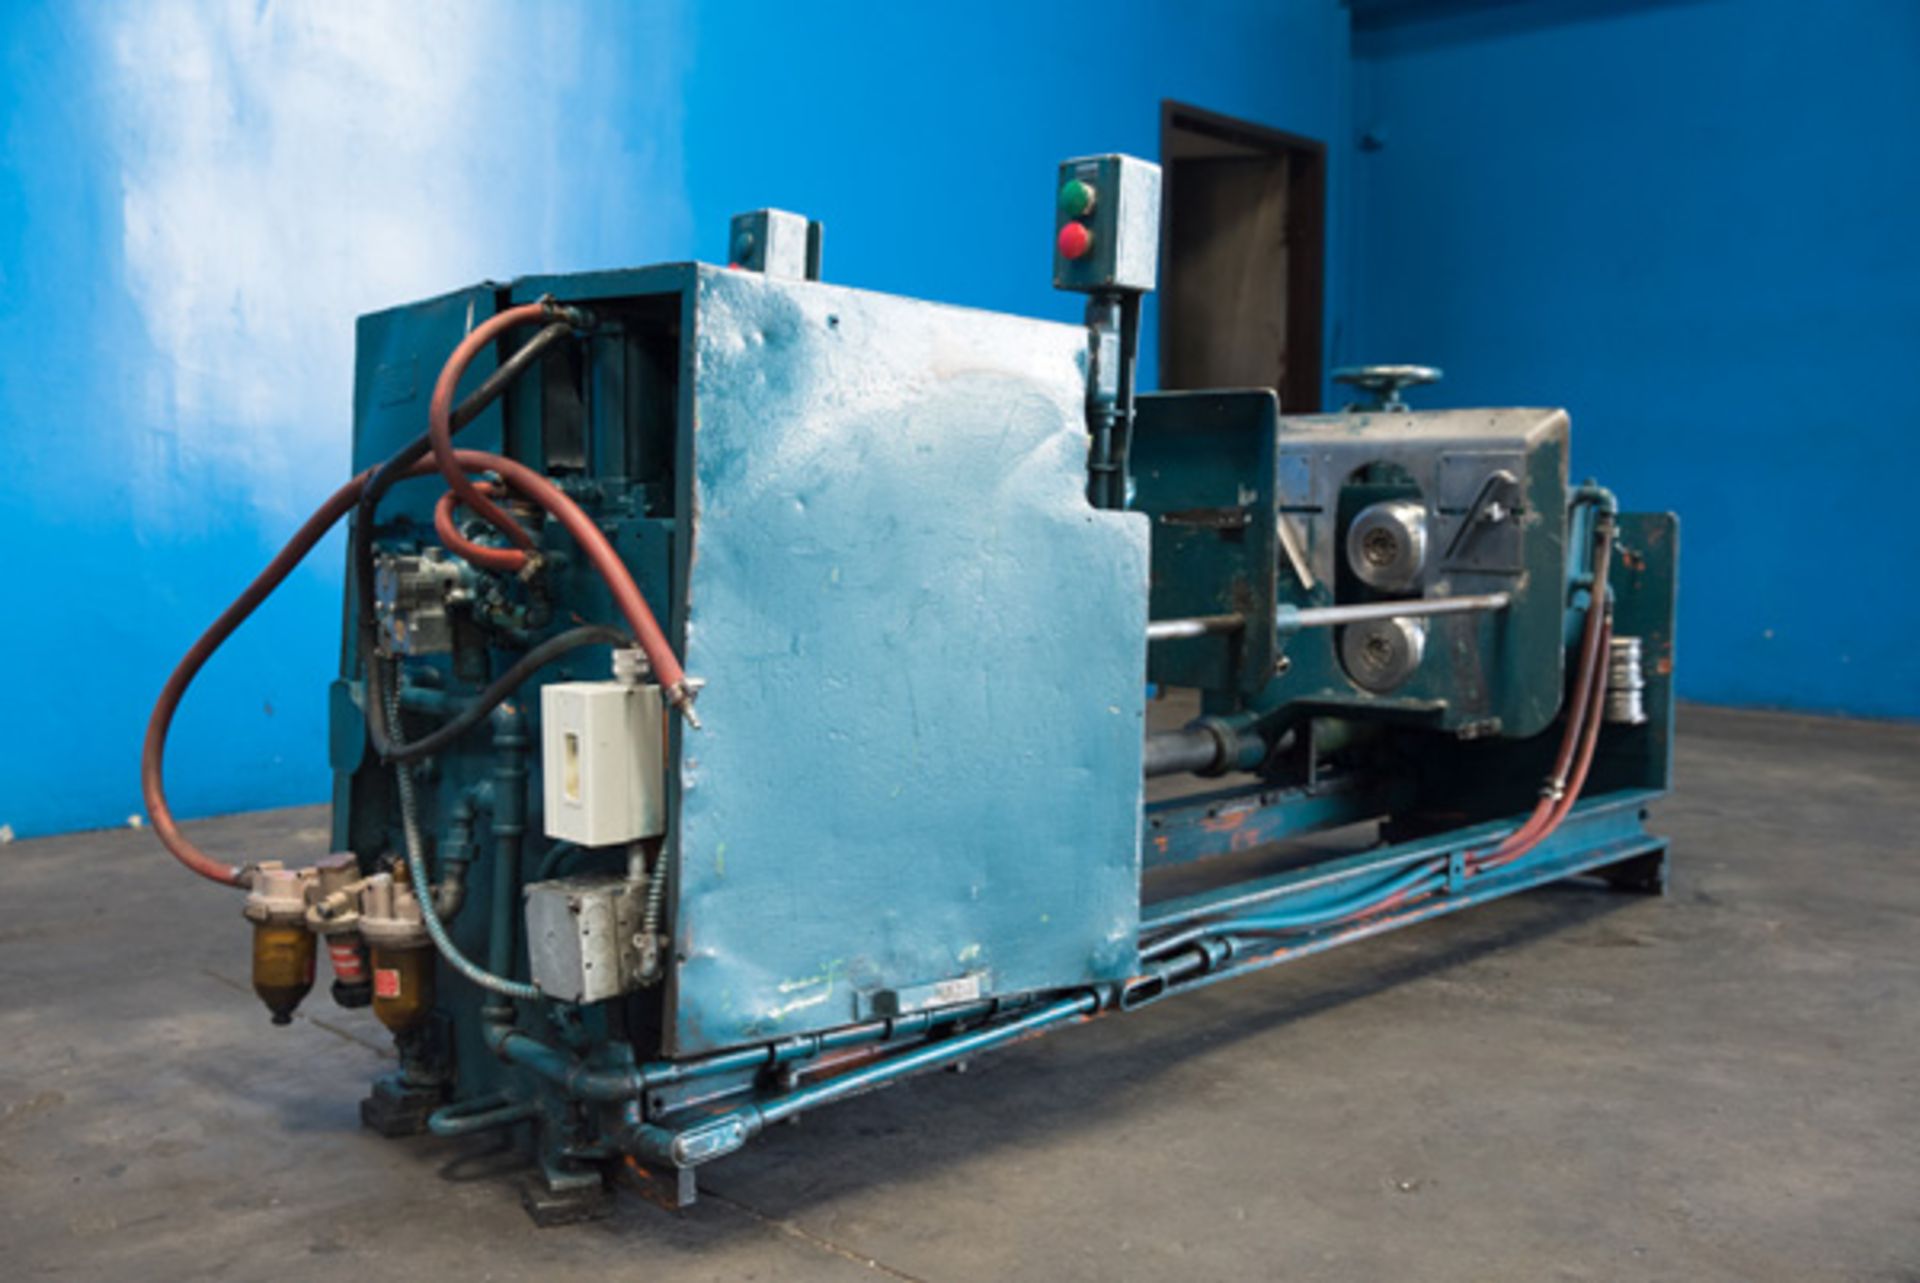 Dual End Can Bead Flanging Machine, Located In: Huntington Park, CA - 7181 - Image 7 of 14